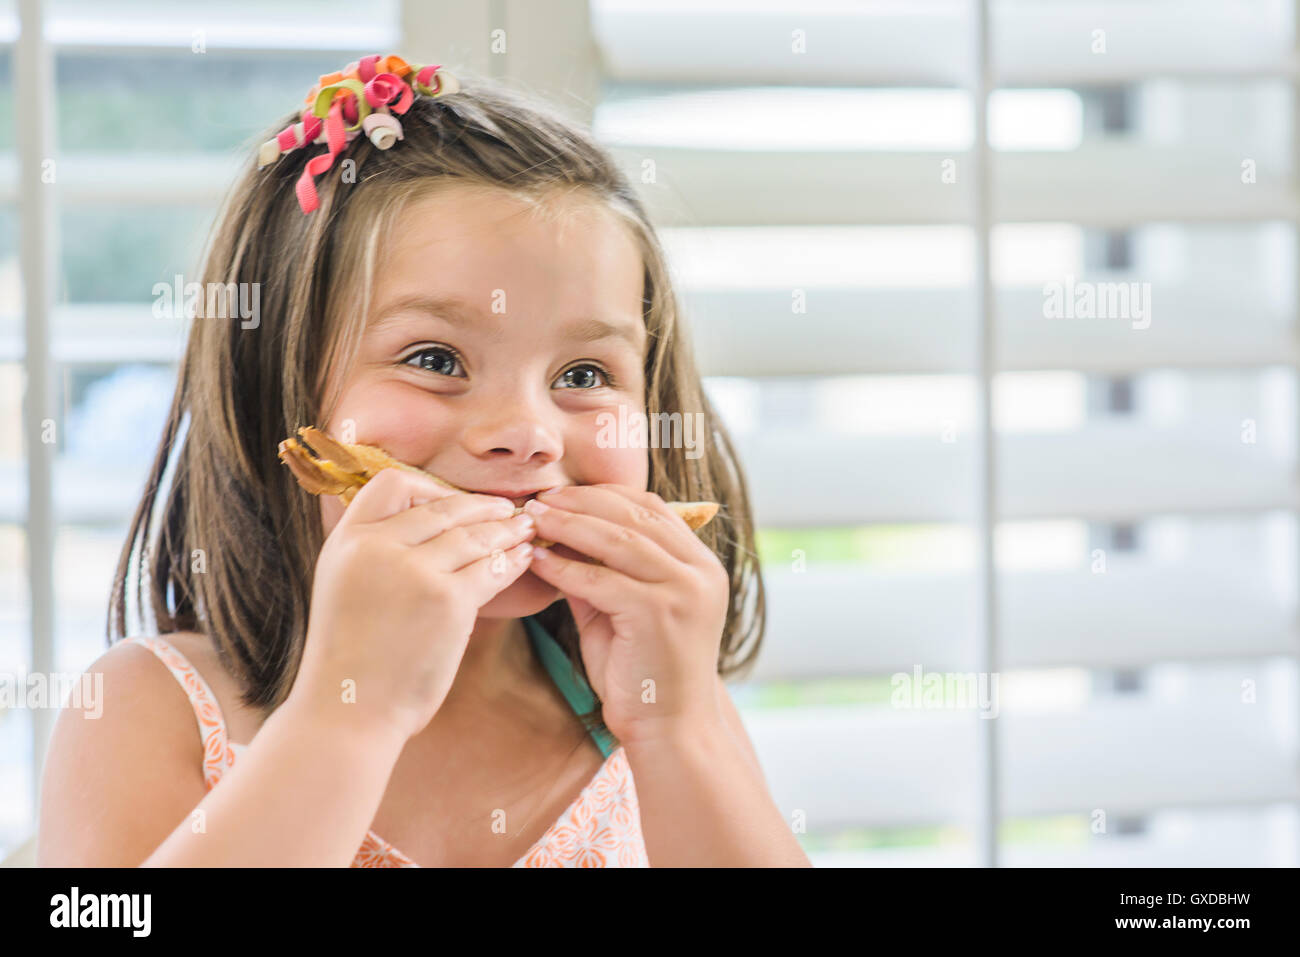 Cute girl eating sandwich in kitchen Stock Photo